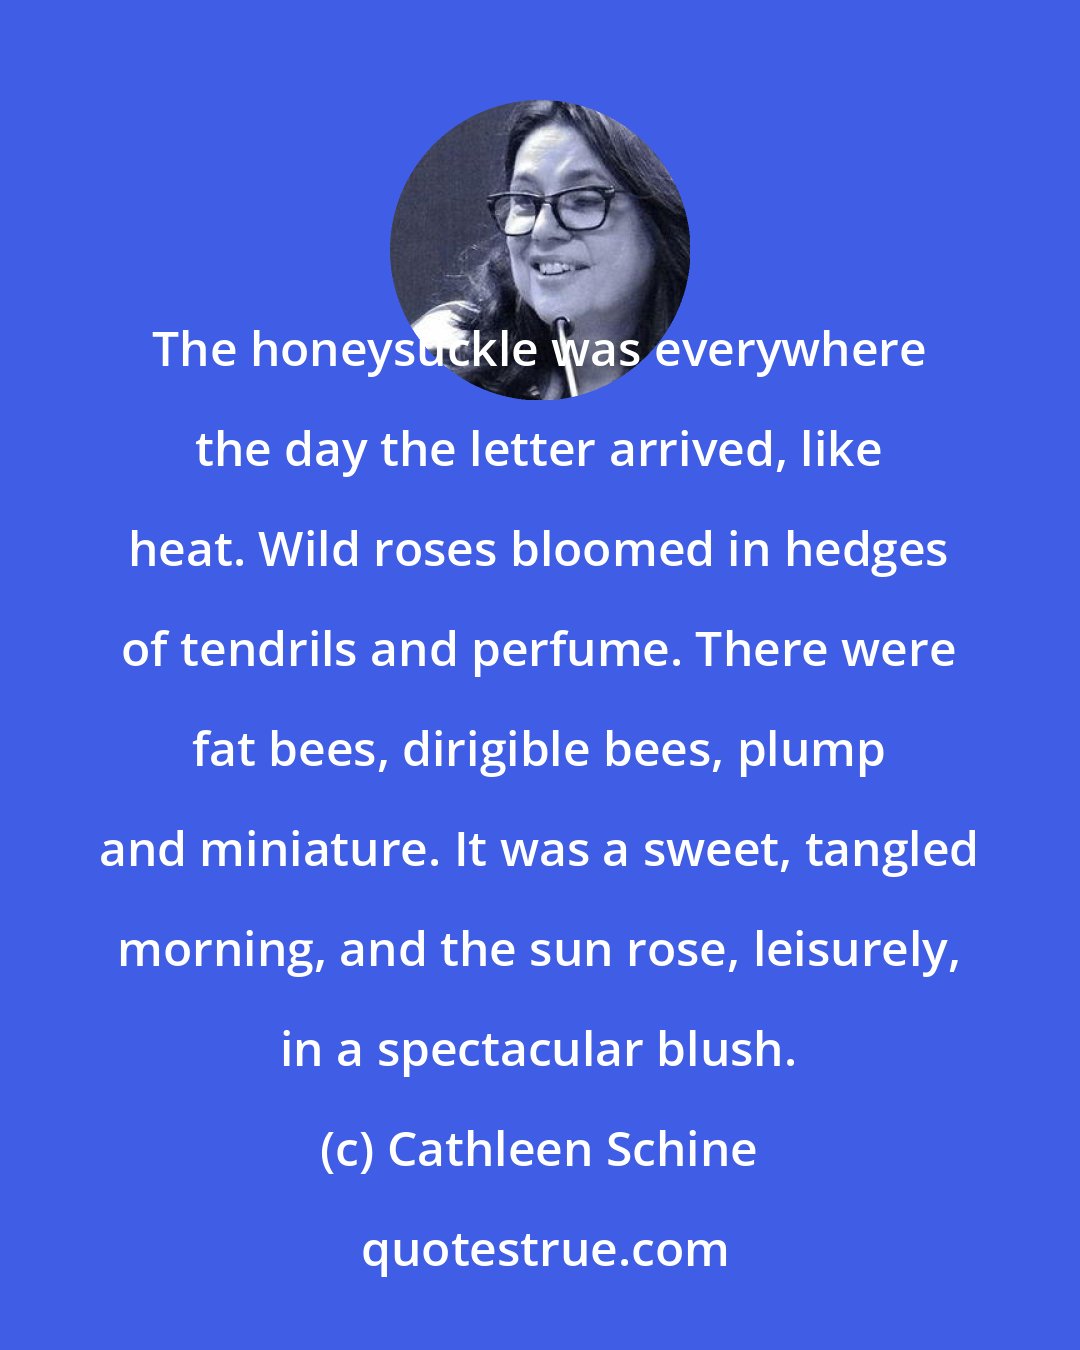 Cathleen Schine: The honeysuckle was everywhere the day the letter arrived, like heat. Wild roses bloomed in hedges of tendrils and perfume. There were fat bees, dirigible bees, plump and miniature. It was a sweet, tangled morning, and the sun rose, leisurely, in a spectacular blush.